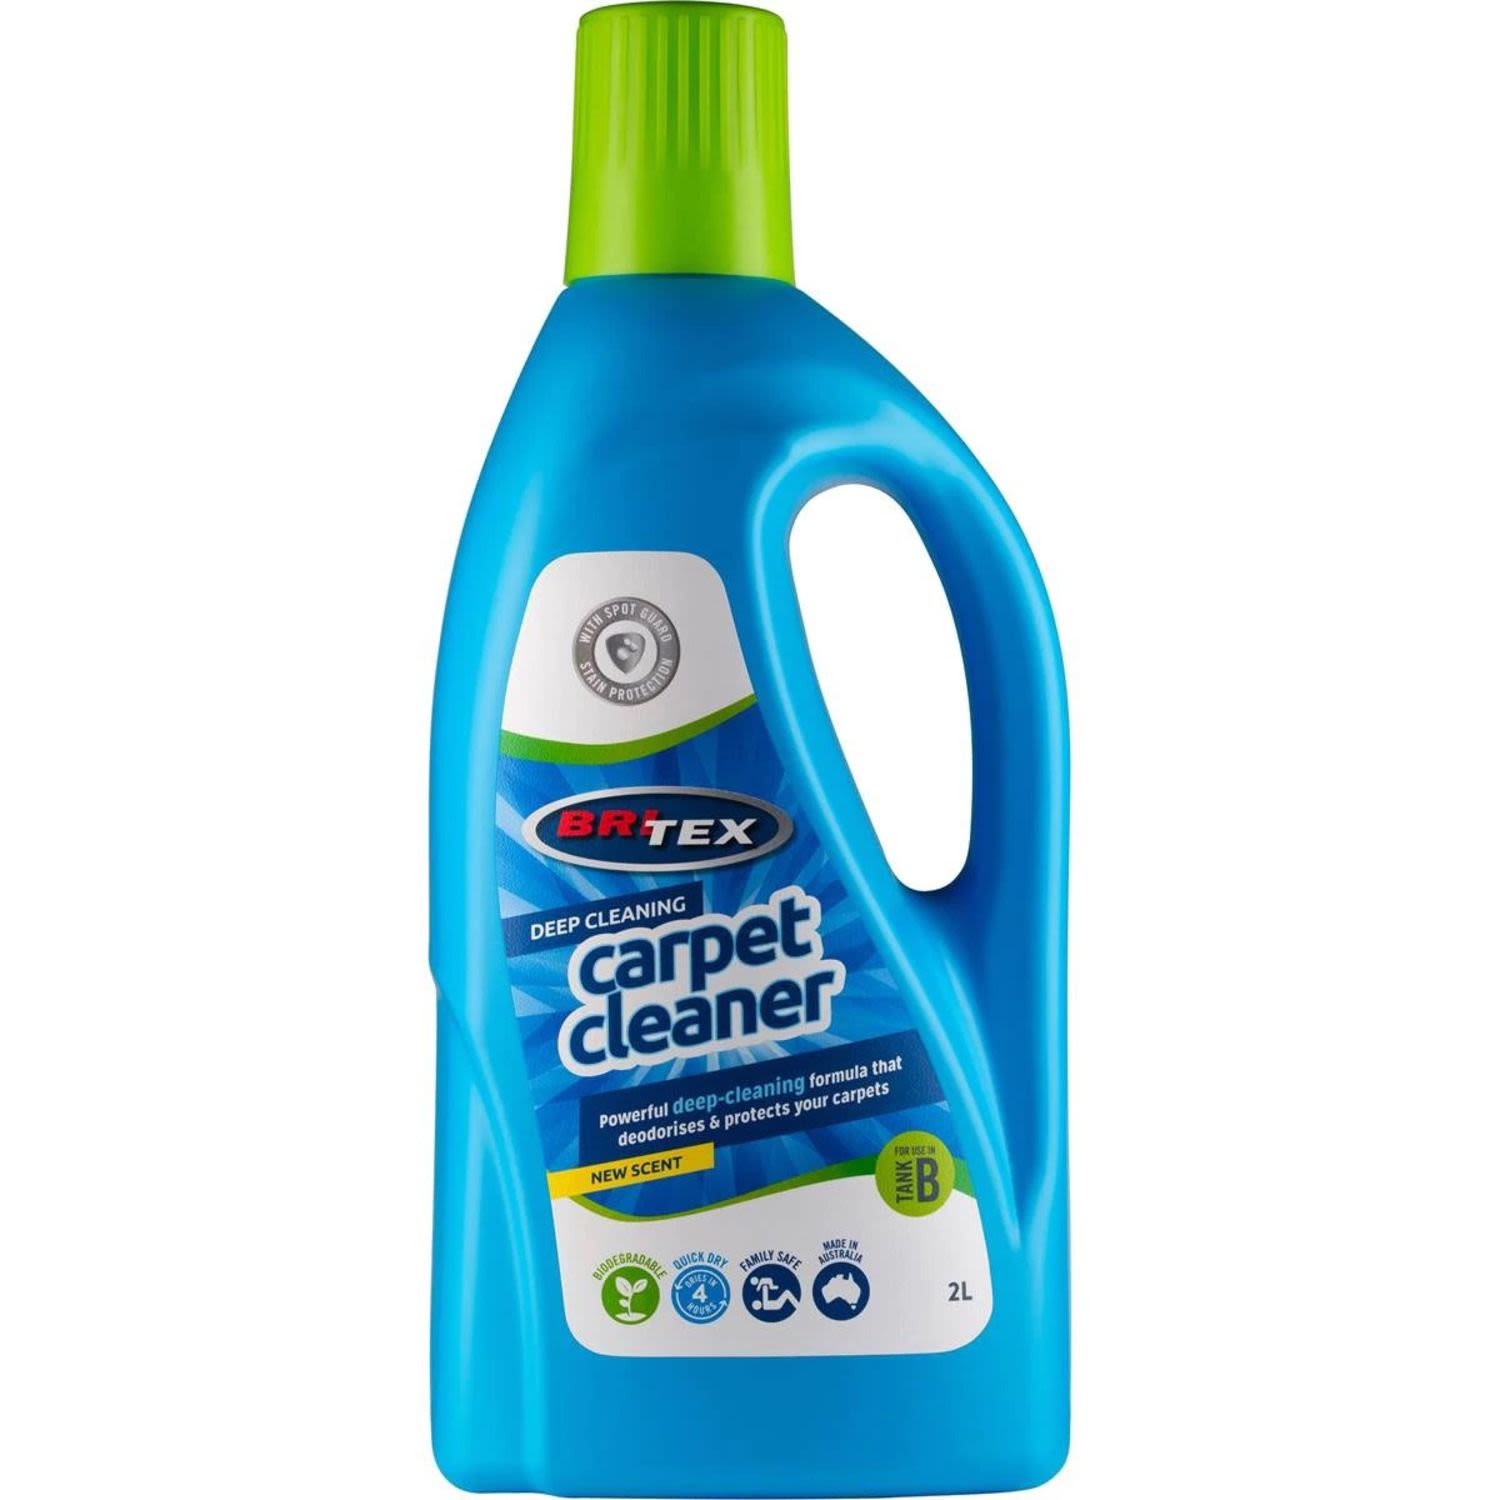 Britex Heavy Duty Cleaner, 2 Litre